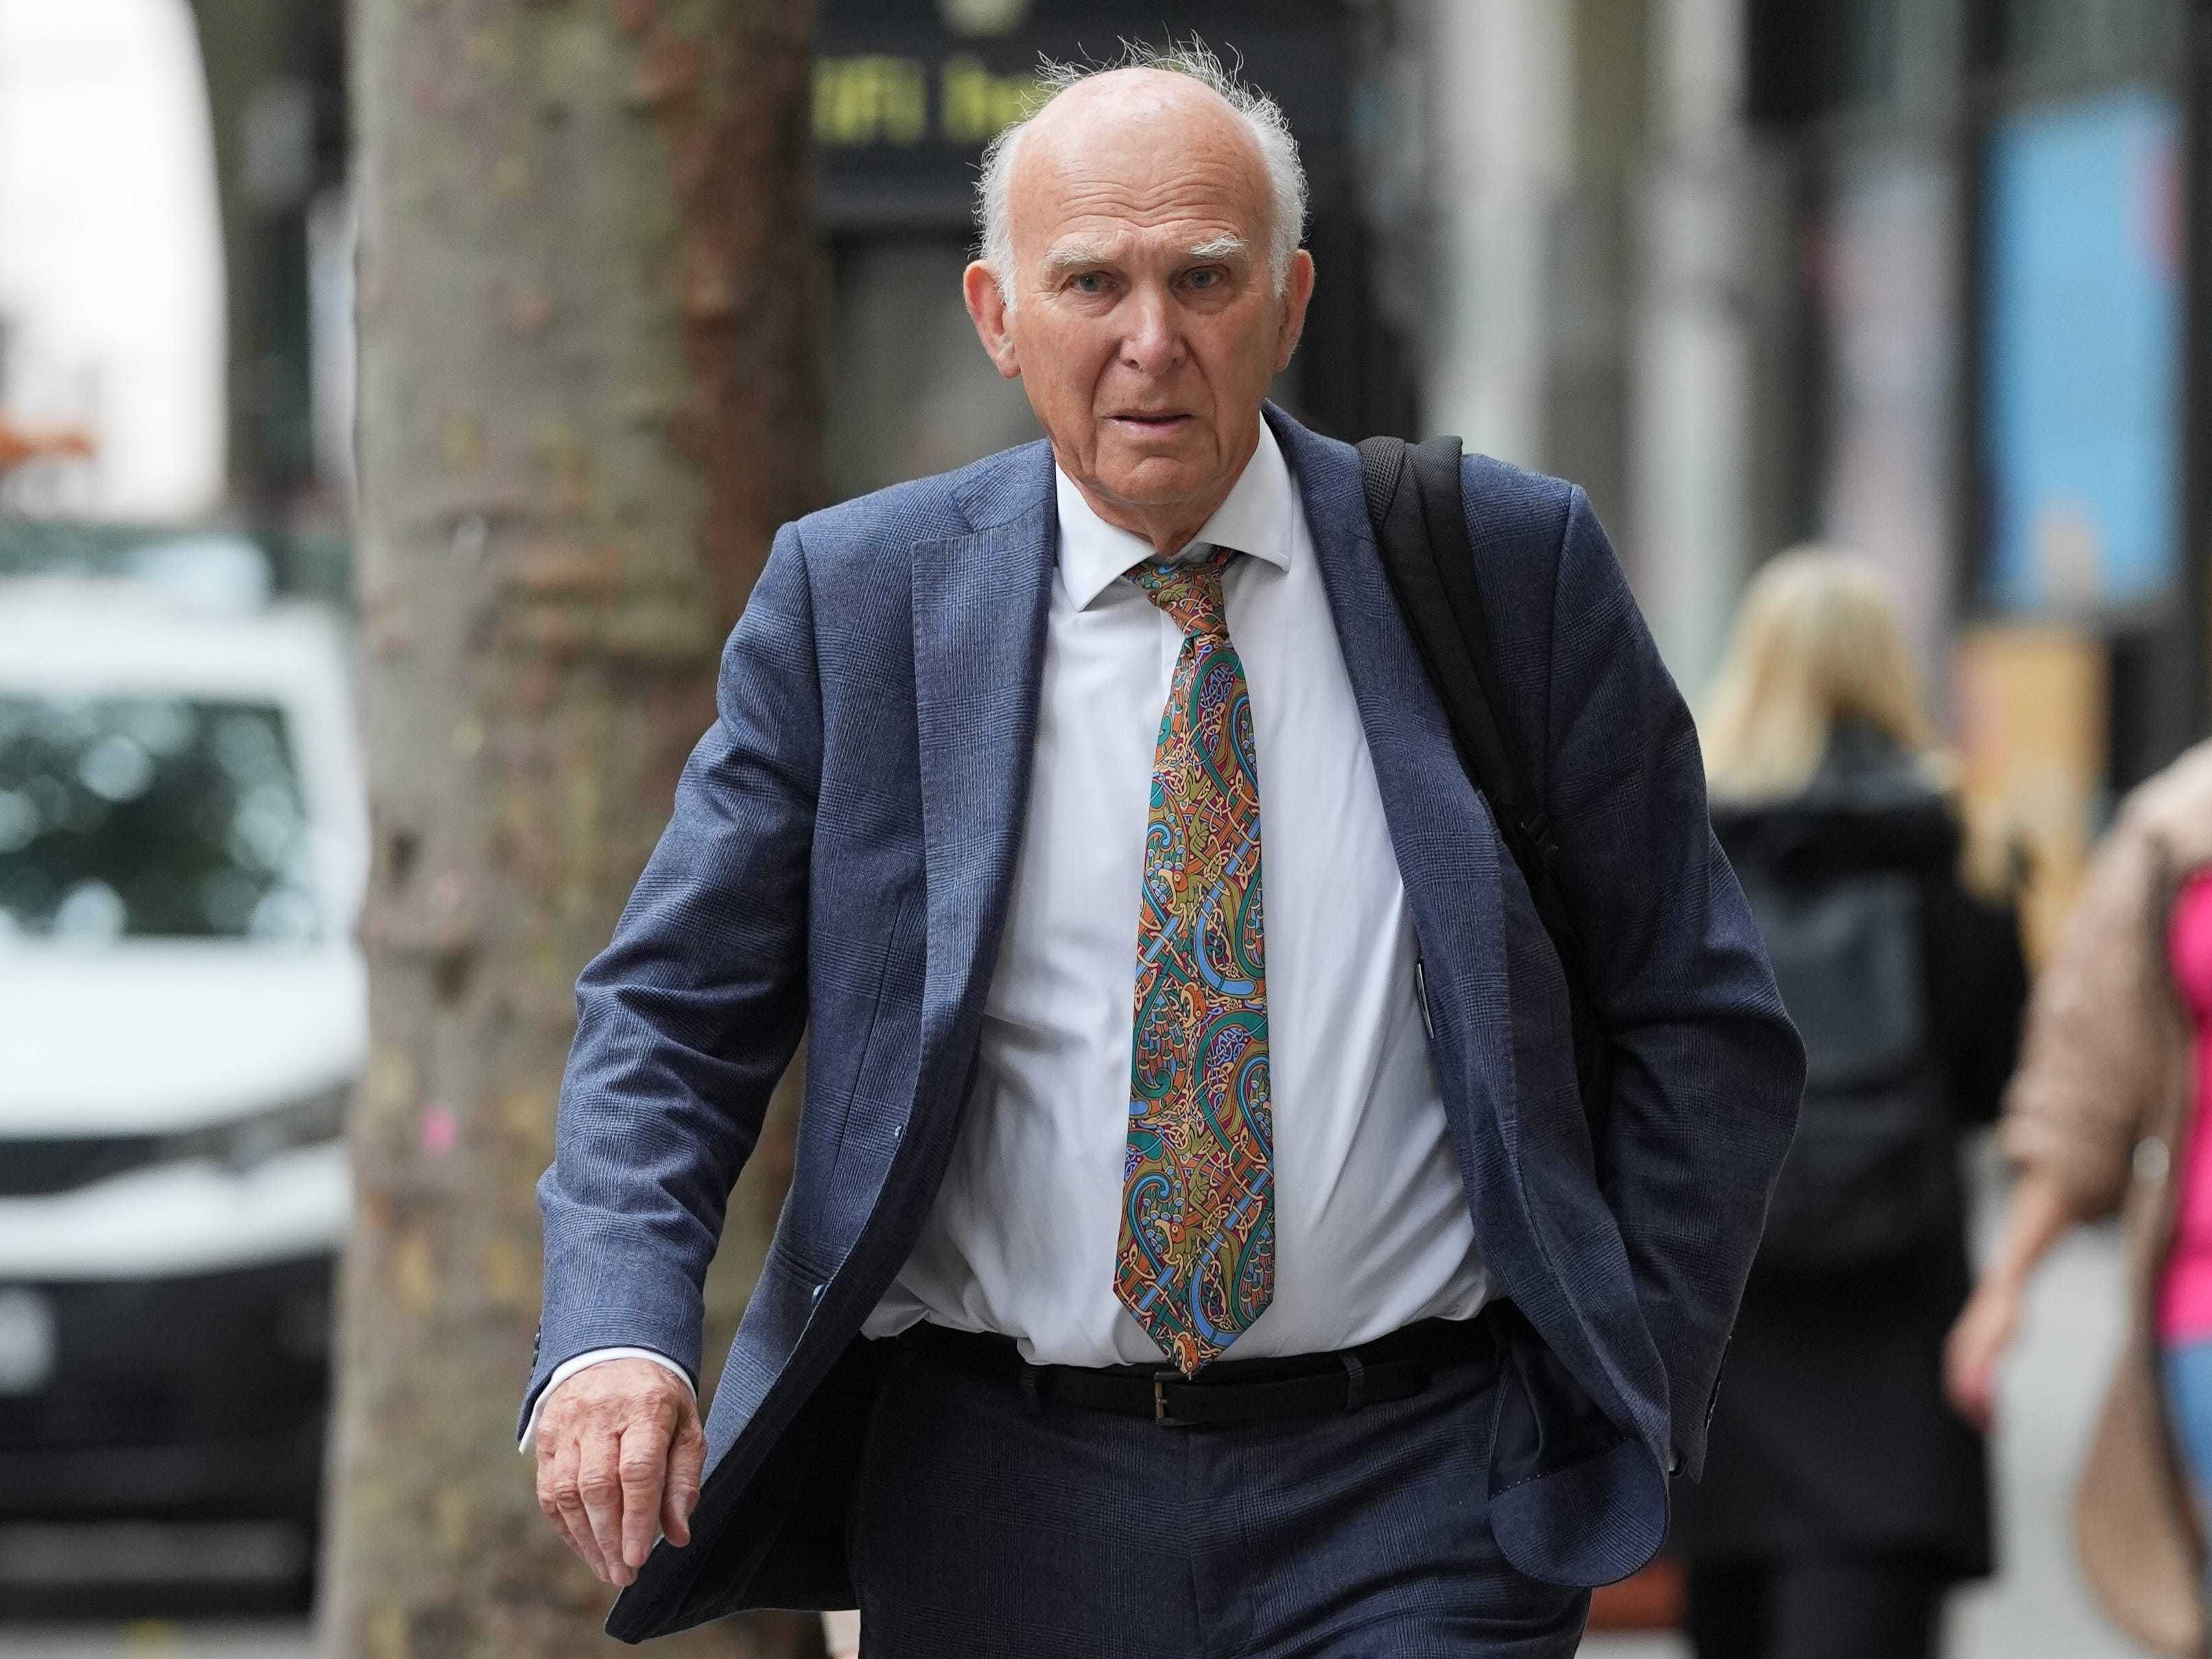 Sir Vince Cable accepts department had ‘clear policy failure’ in Horizon scandal